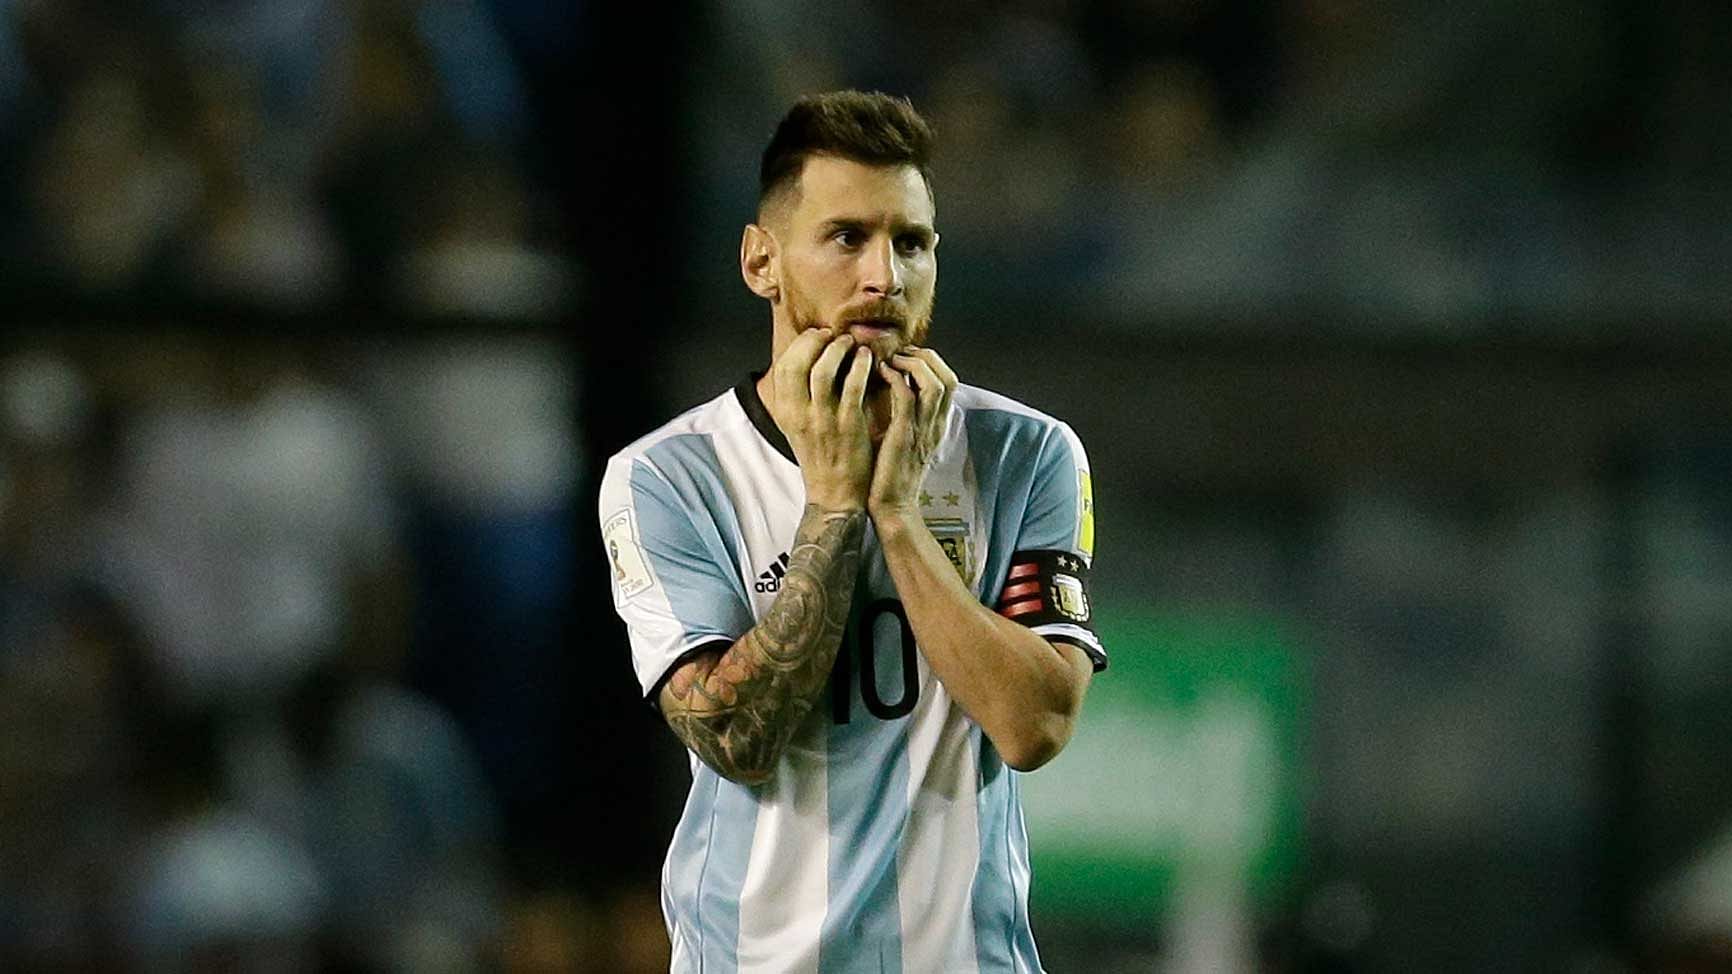 Argentina’s Lionel Messi reacts during a World Cup qualifying soccer match against Peru at La Bombonera stadium in Buenos Aires, Argentina, Thursday, Oct. 5, 2017.&nbsp;